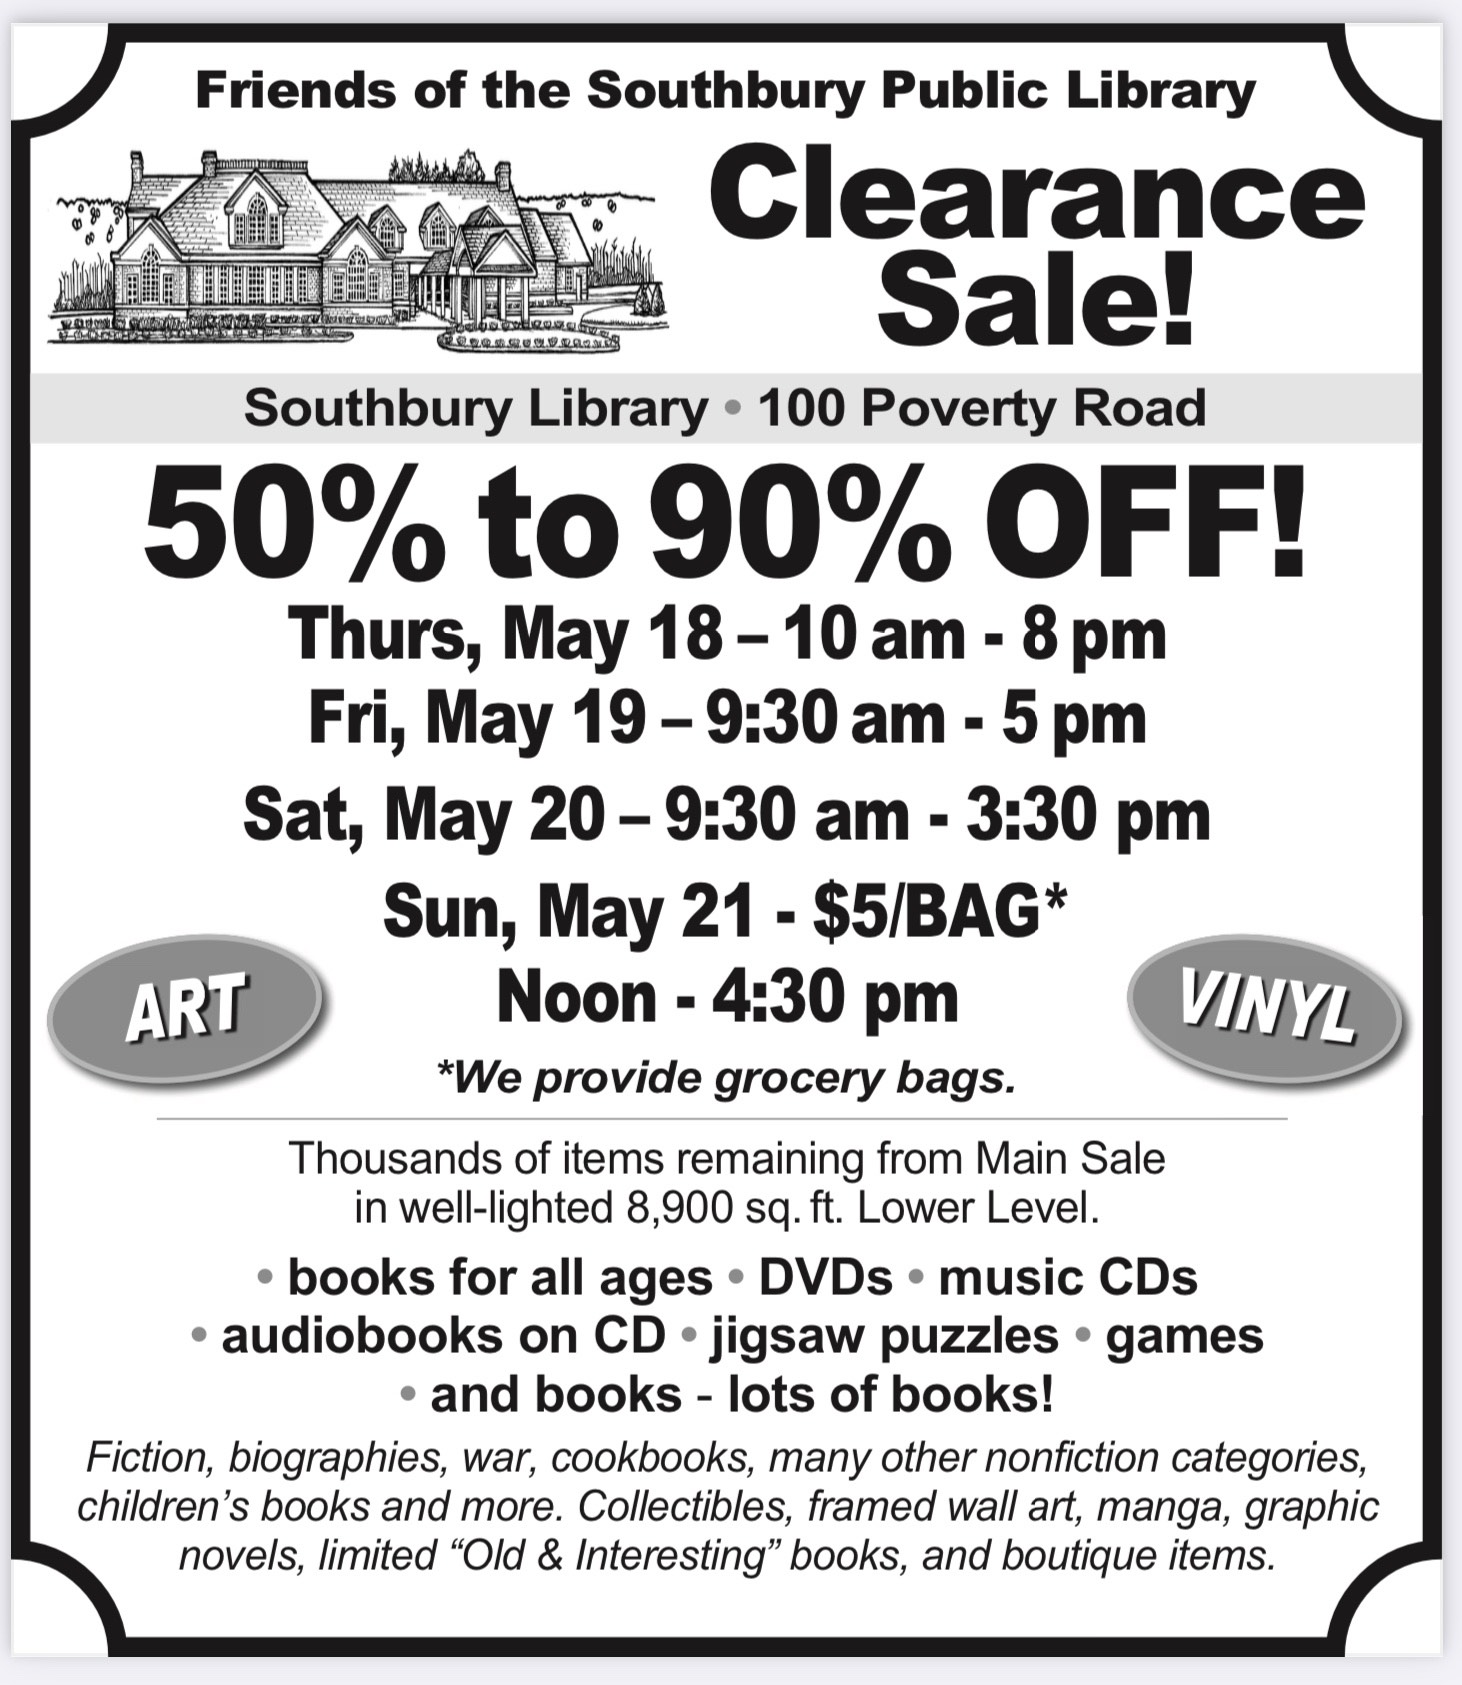 an ad with the text "Friends of the Southbury Public Library Clearance Sale! Southbury Library, 100 Poverty Road. 50-90%off! Thurs, May 18: 10am-8pm. Fri, May 19: 9:30am-5pm, Sat May 20: 9:30am-3:30pm. Sun, May 21: $5/Bag (we provide the bags): Noon to 4:30pm. Art! Vinyl! Thousands of items remaining from Main Sale in well-lit 8,900 square foot Lower Level. Books for all ages, DVDs, music CDs, audiobooks on CD, jigsaw puzzles, games, and books- lots of books!"